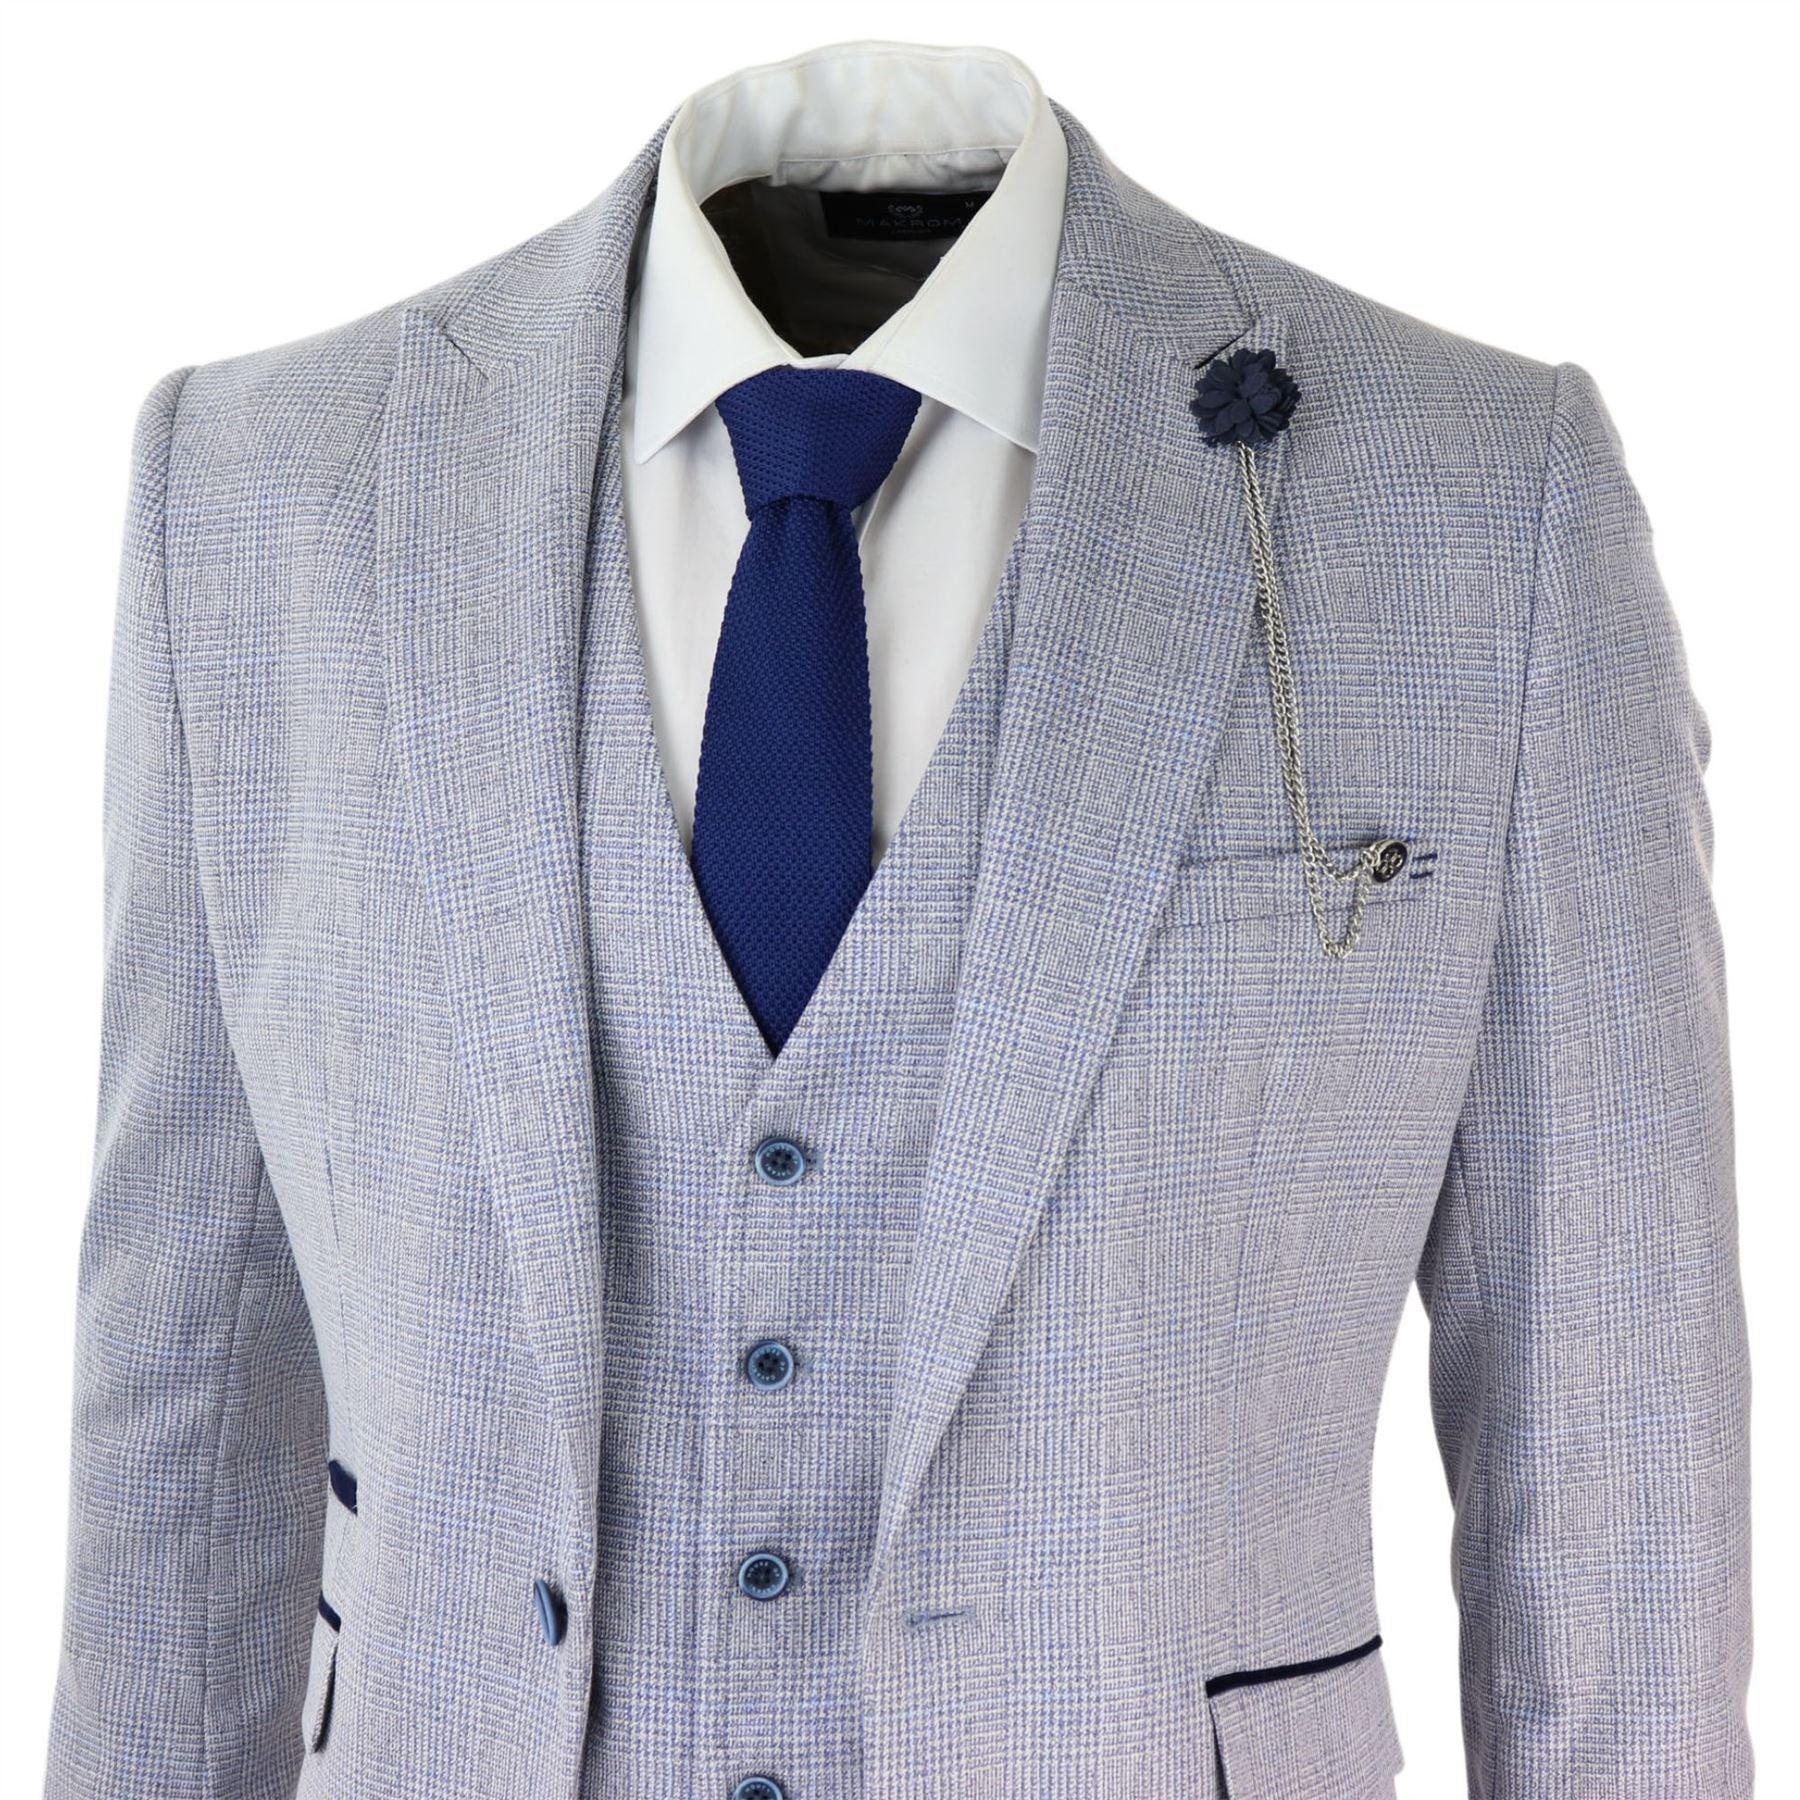 Mens 3 Piece Check Suit Tweed Light Blue Tailored Fit Wedding Peaky Classic - Knighthood Store